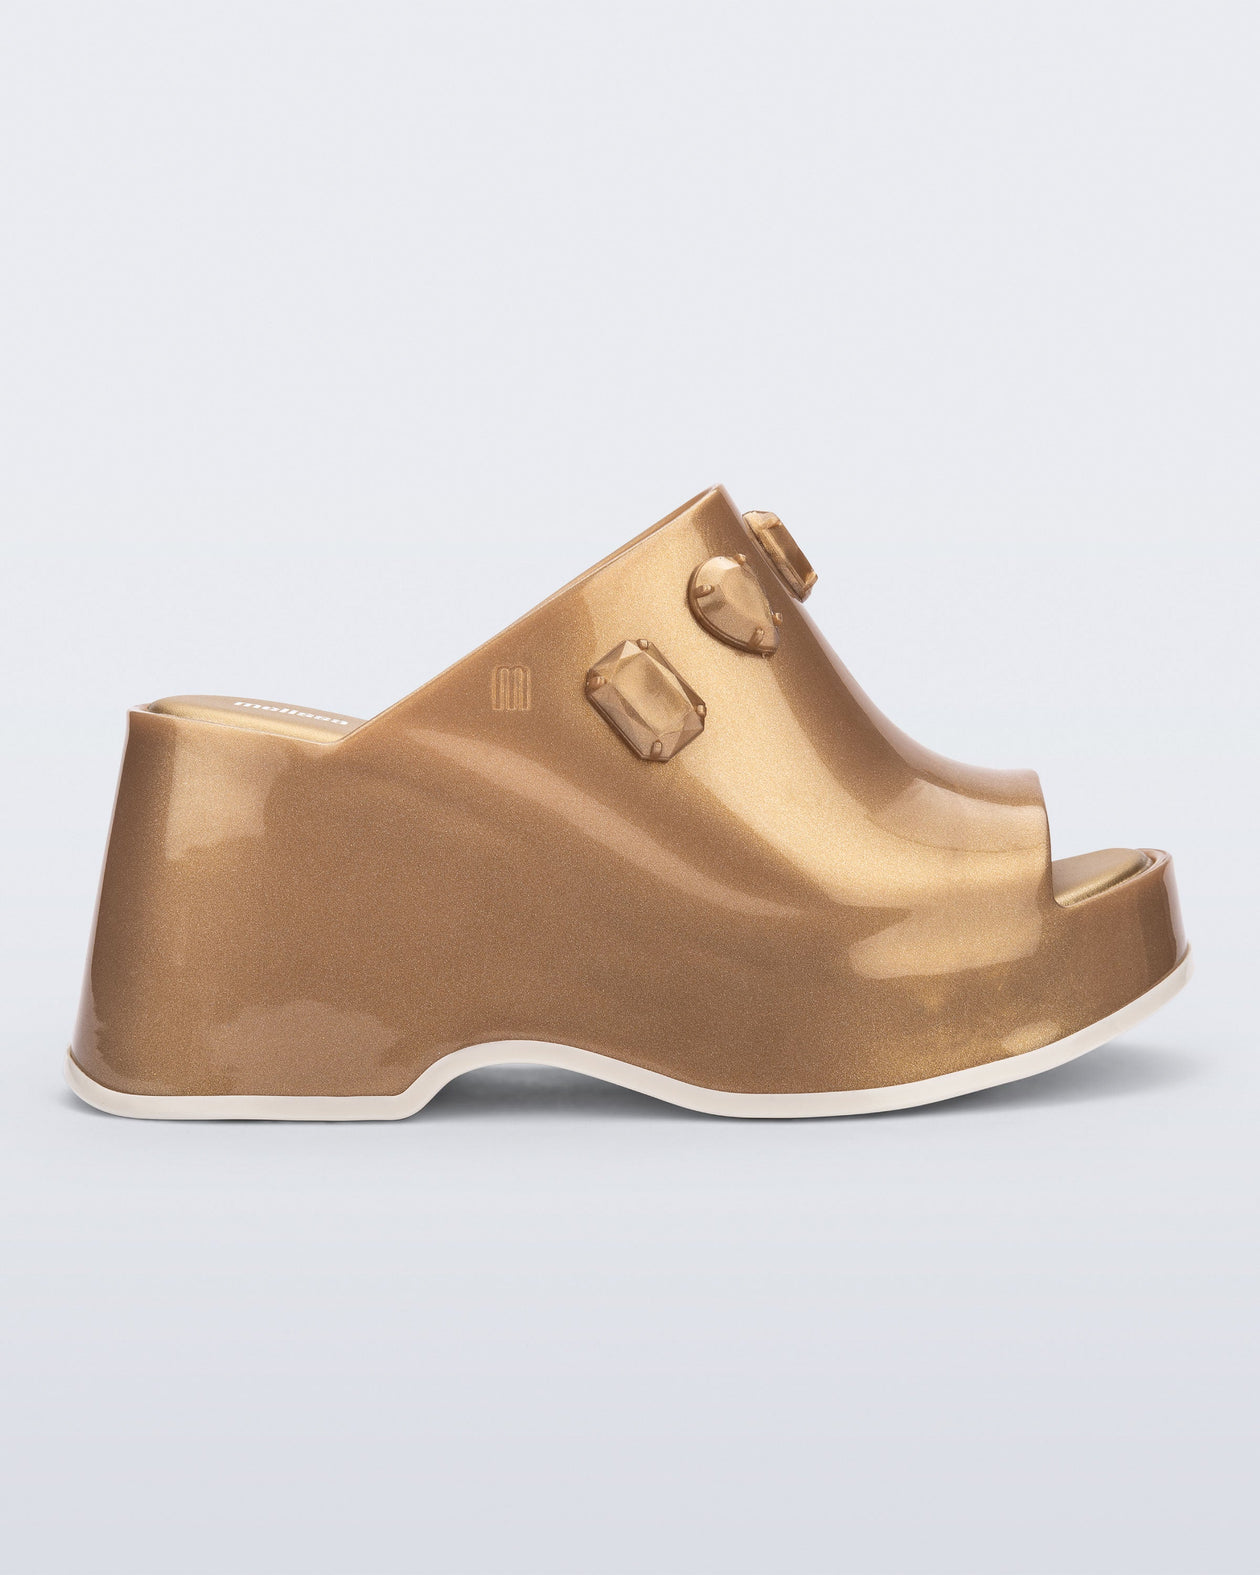 Side view of a metallic gold Patty Stones + Undercover platform open toe mule with beige sole and stone embellishments on upper.